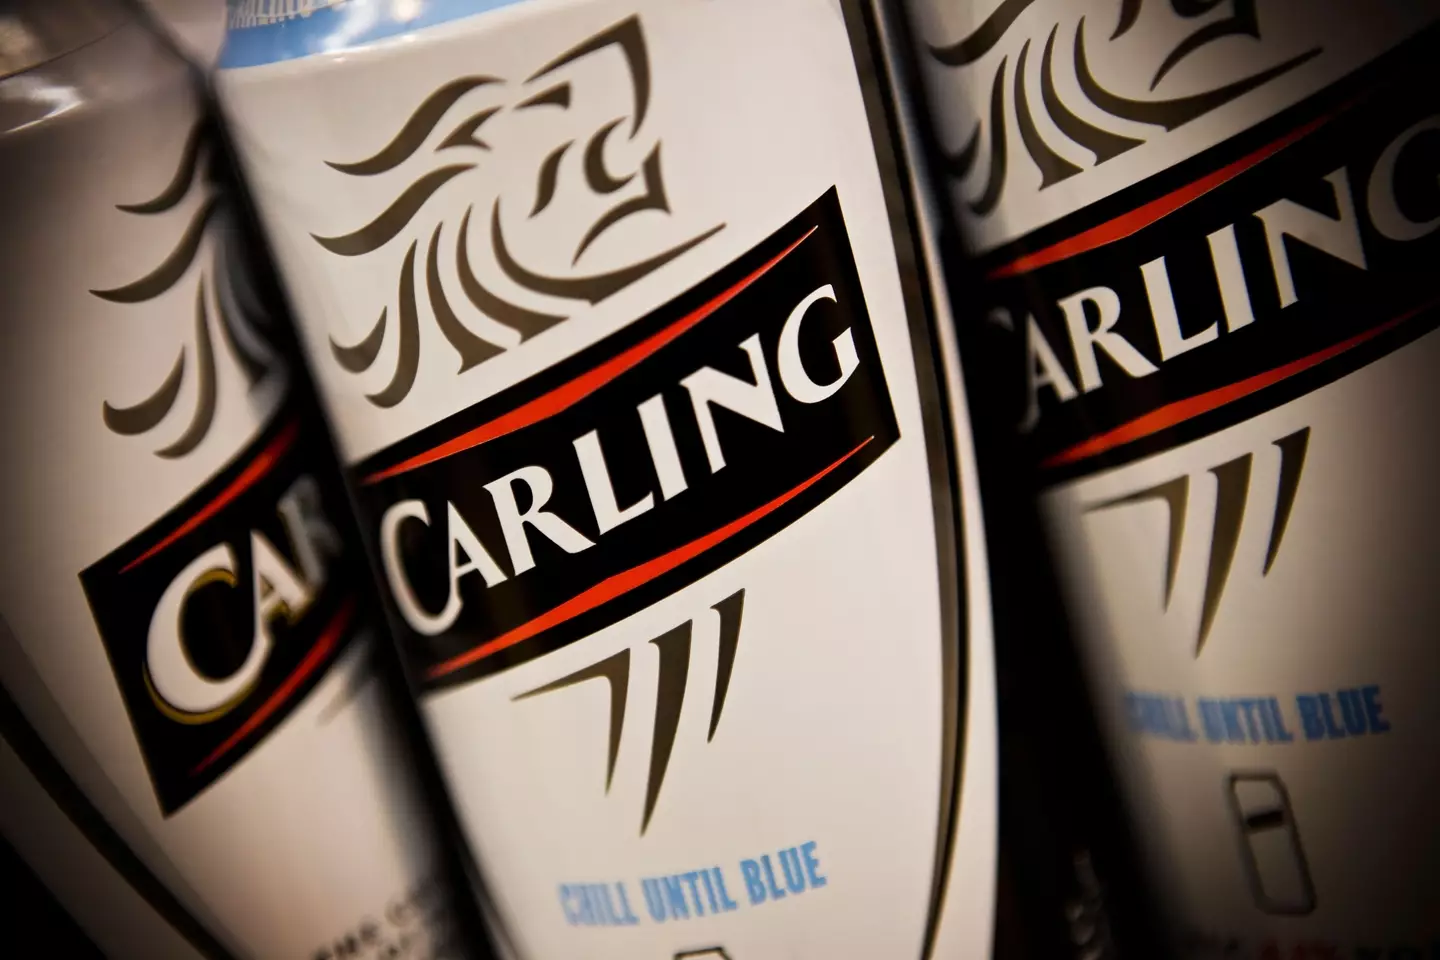 Surely Carling is British? It's got a lion on it. Nope, Canadian.